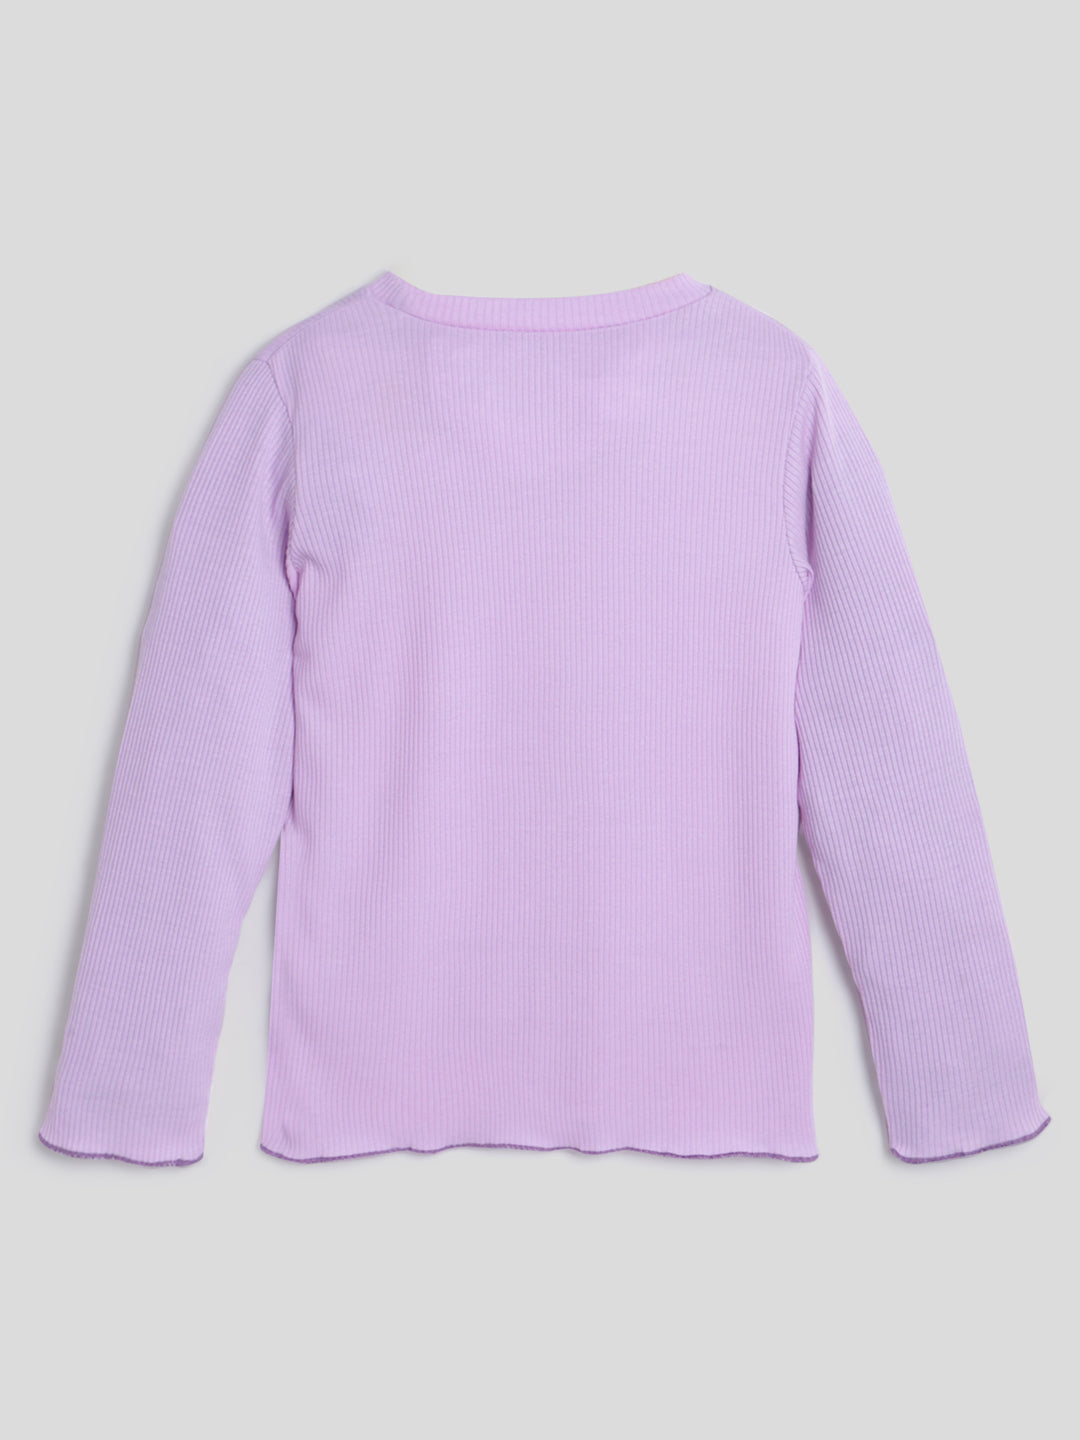 Basic Girls Knitted Tee- Lilac Somersault